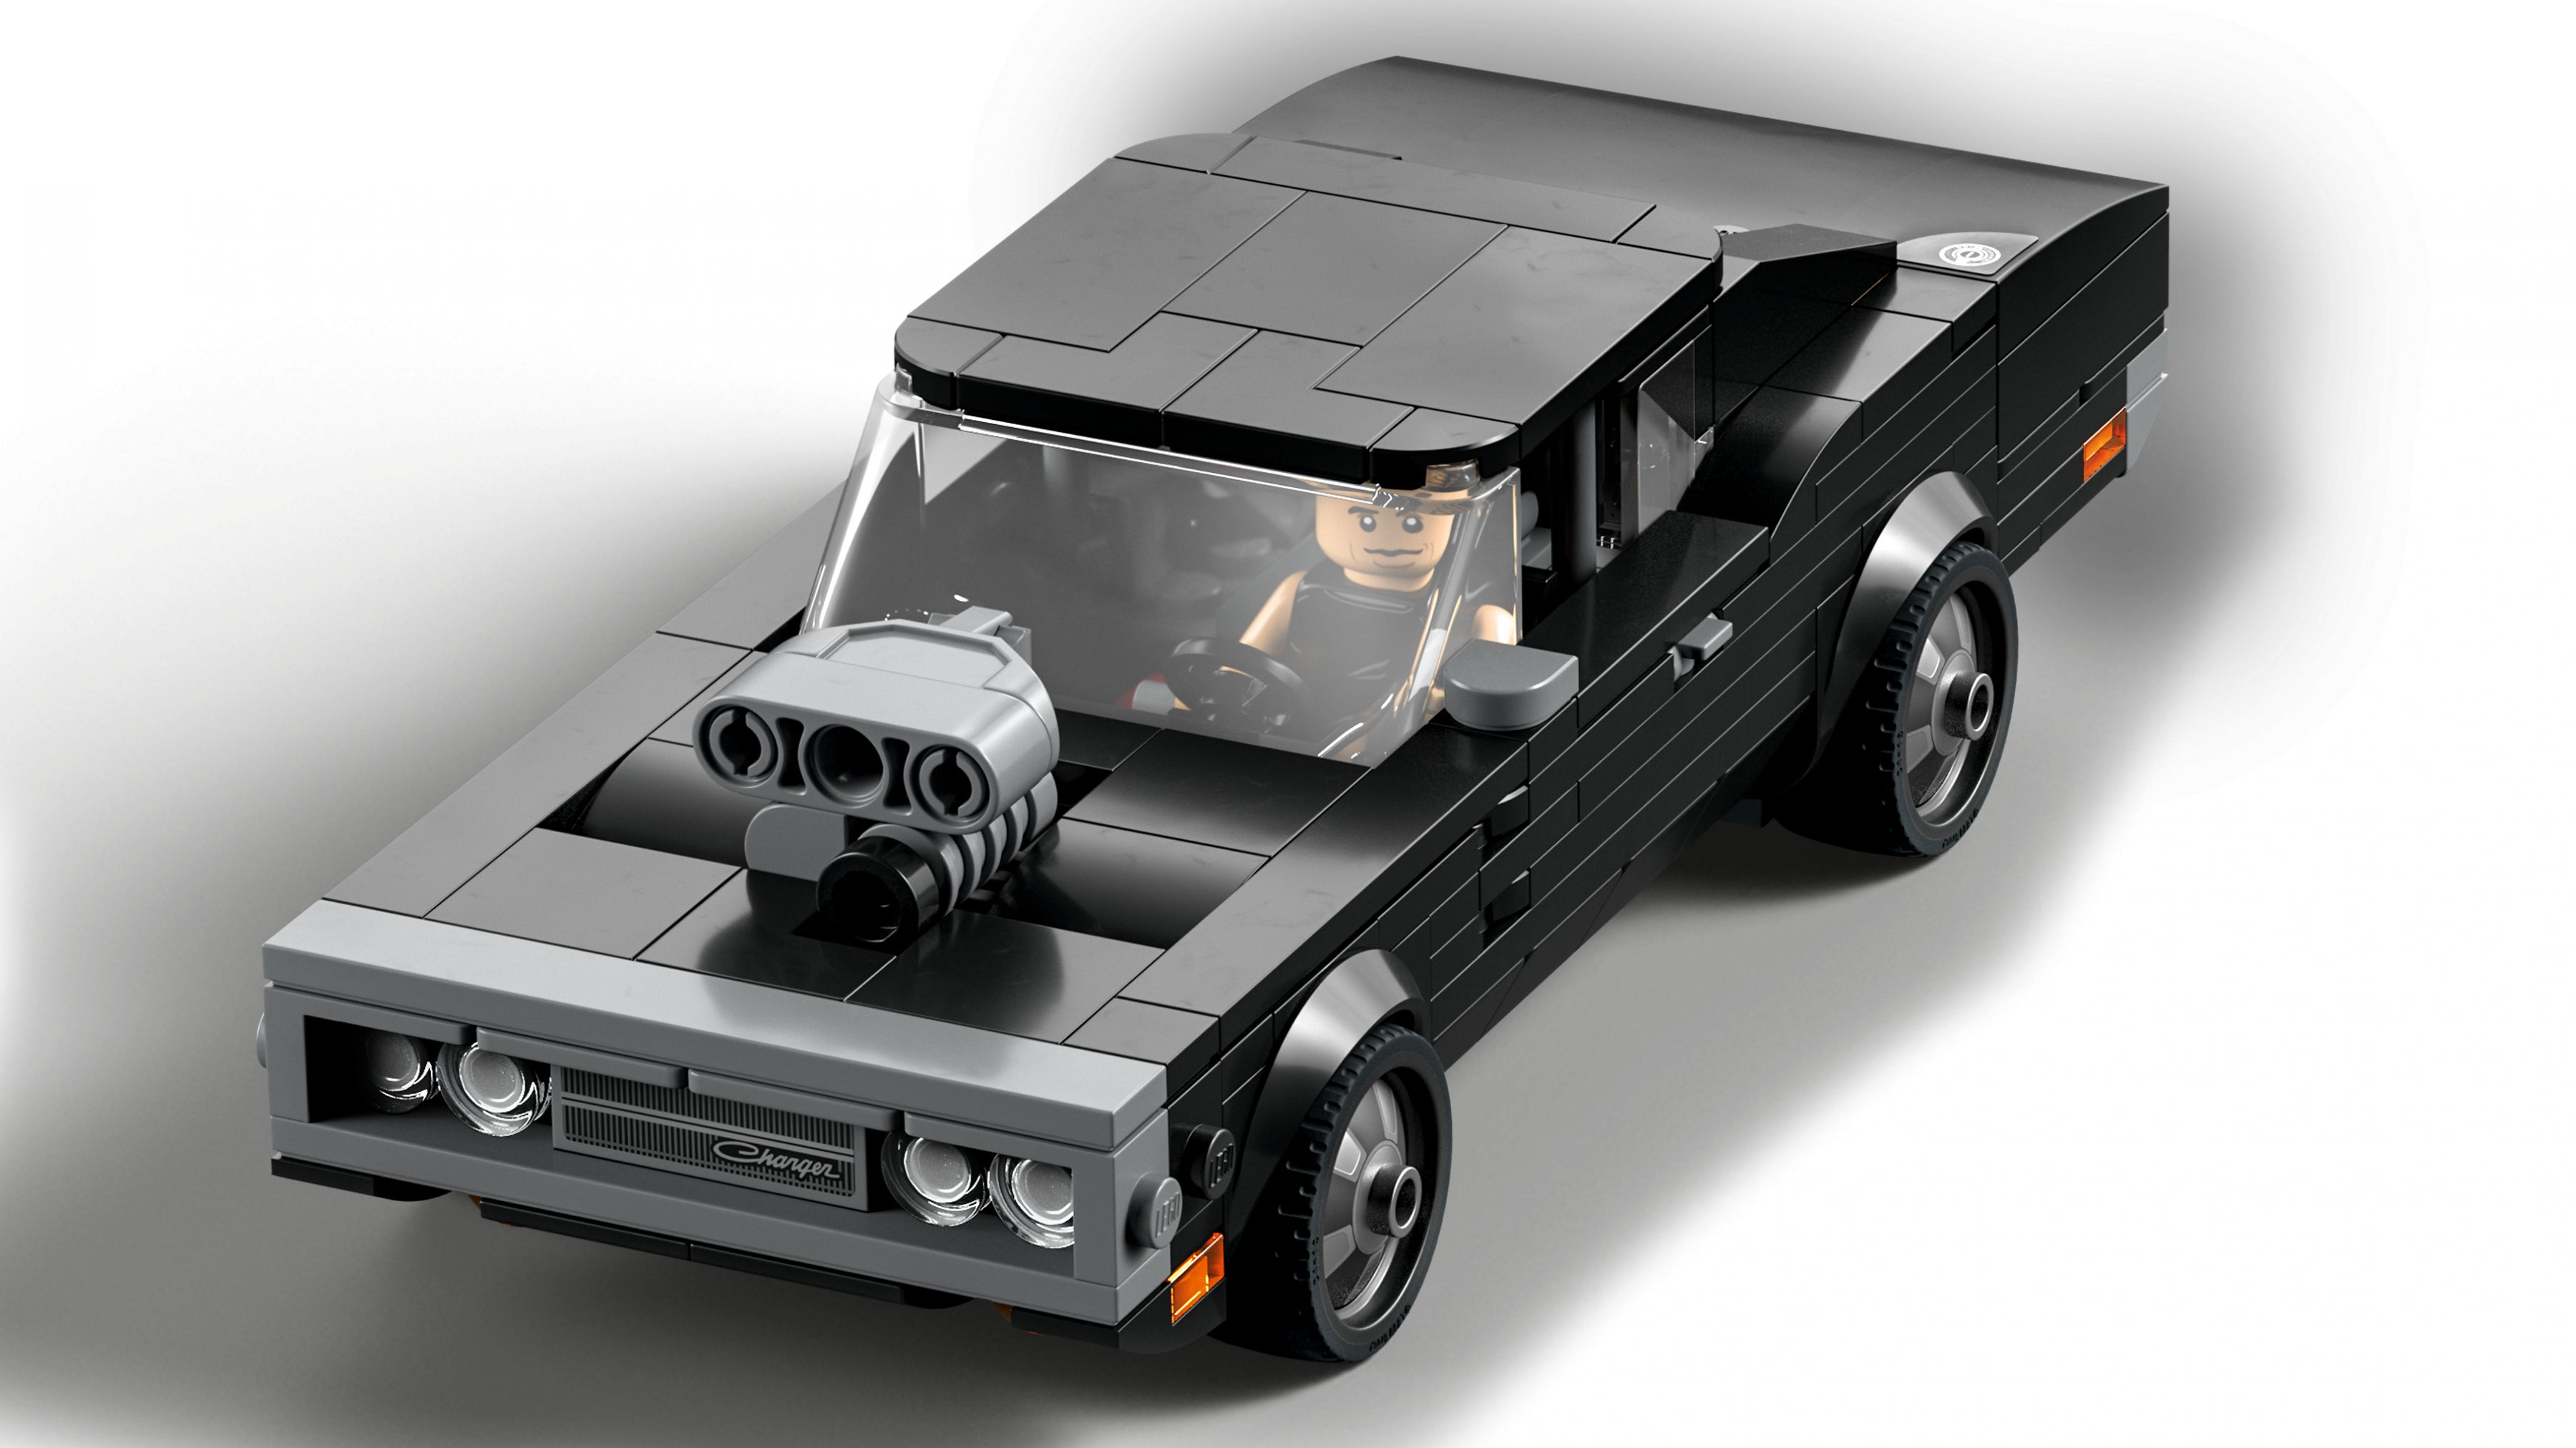 LEGO Speed Champions 76912 Fast & Furious 1970 Dodge Charger R/T LEGO_76912_WEB_SEC01_NOBG.jpg